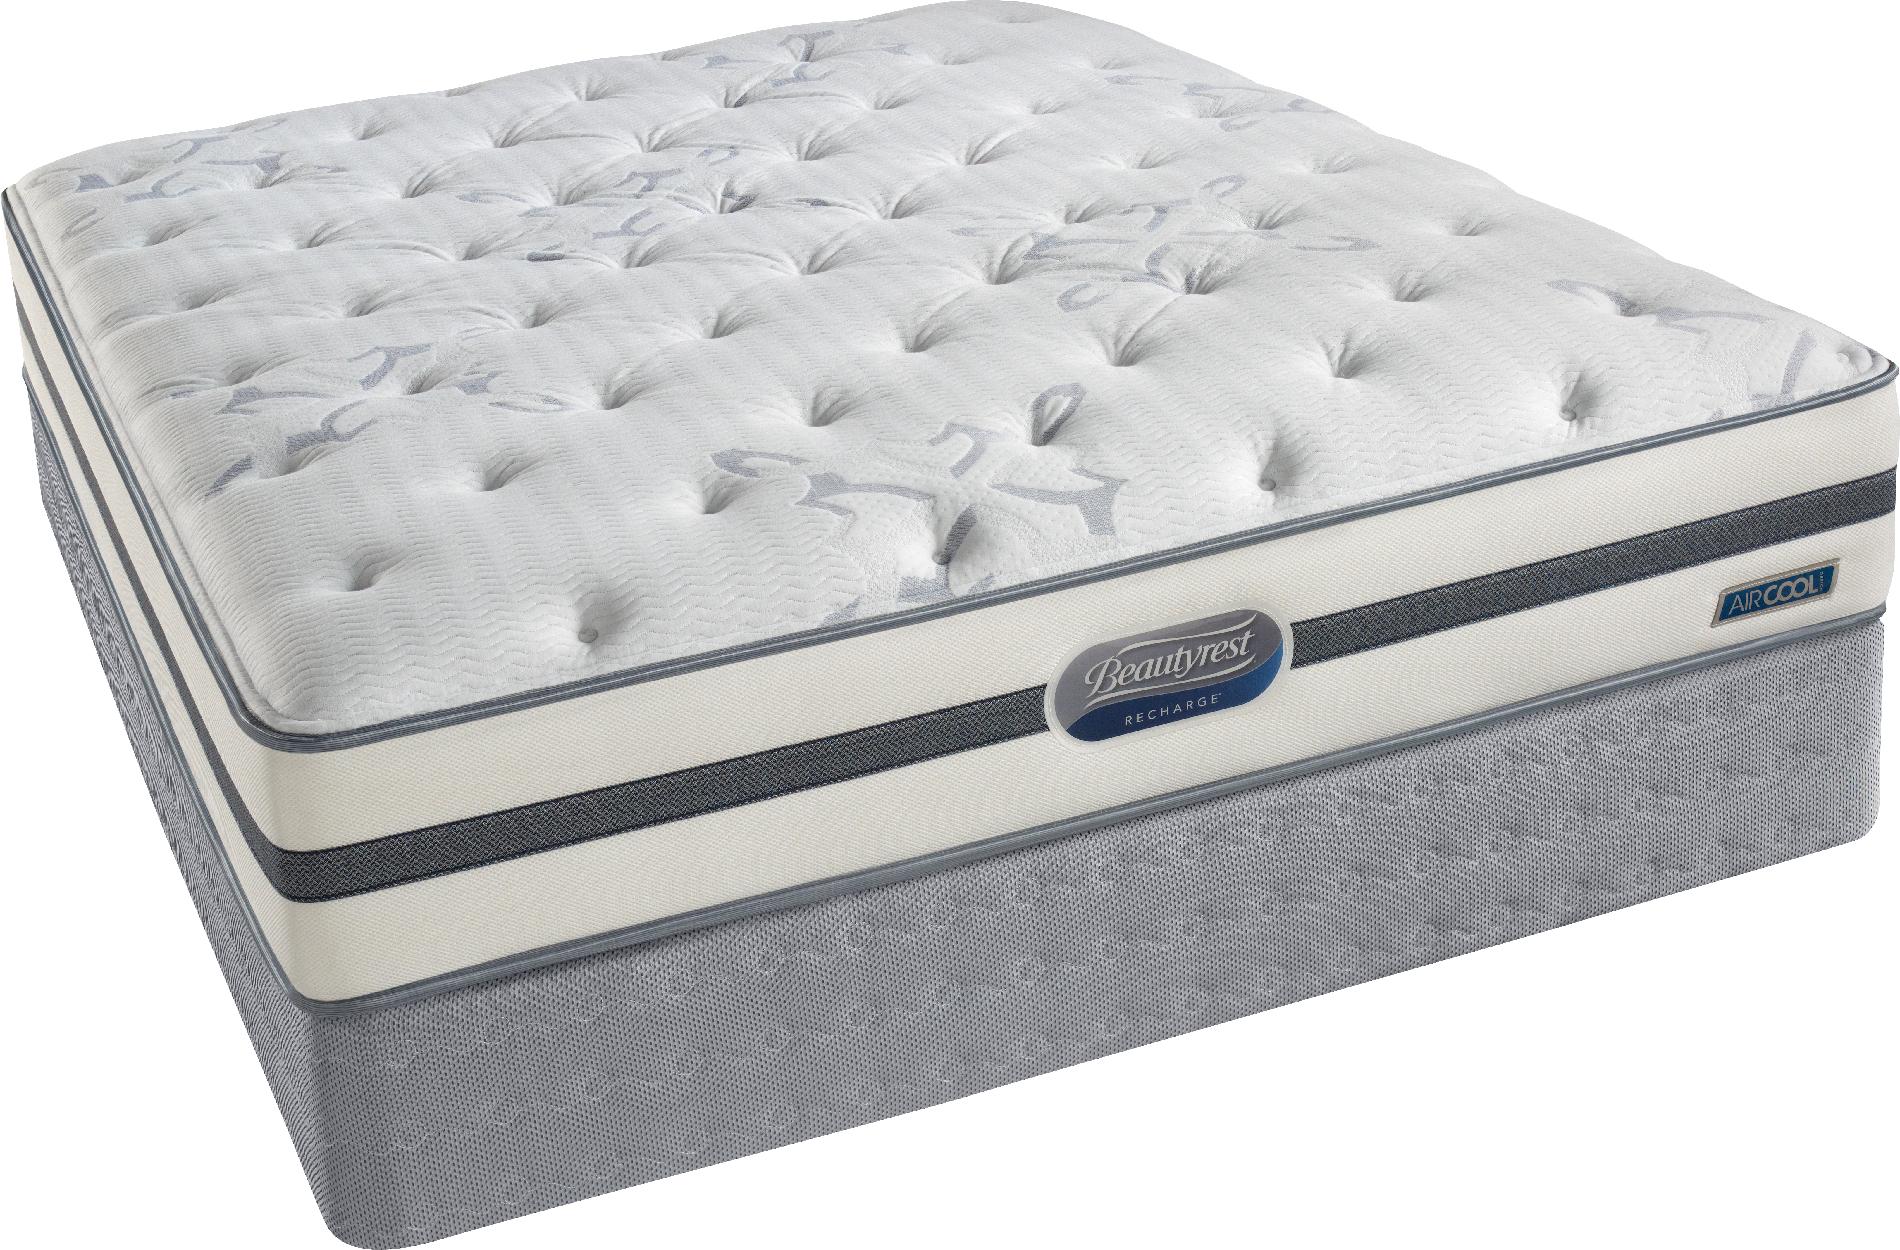 sears double bed mattress